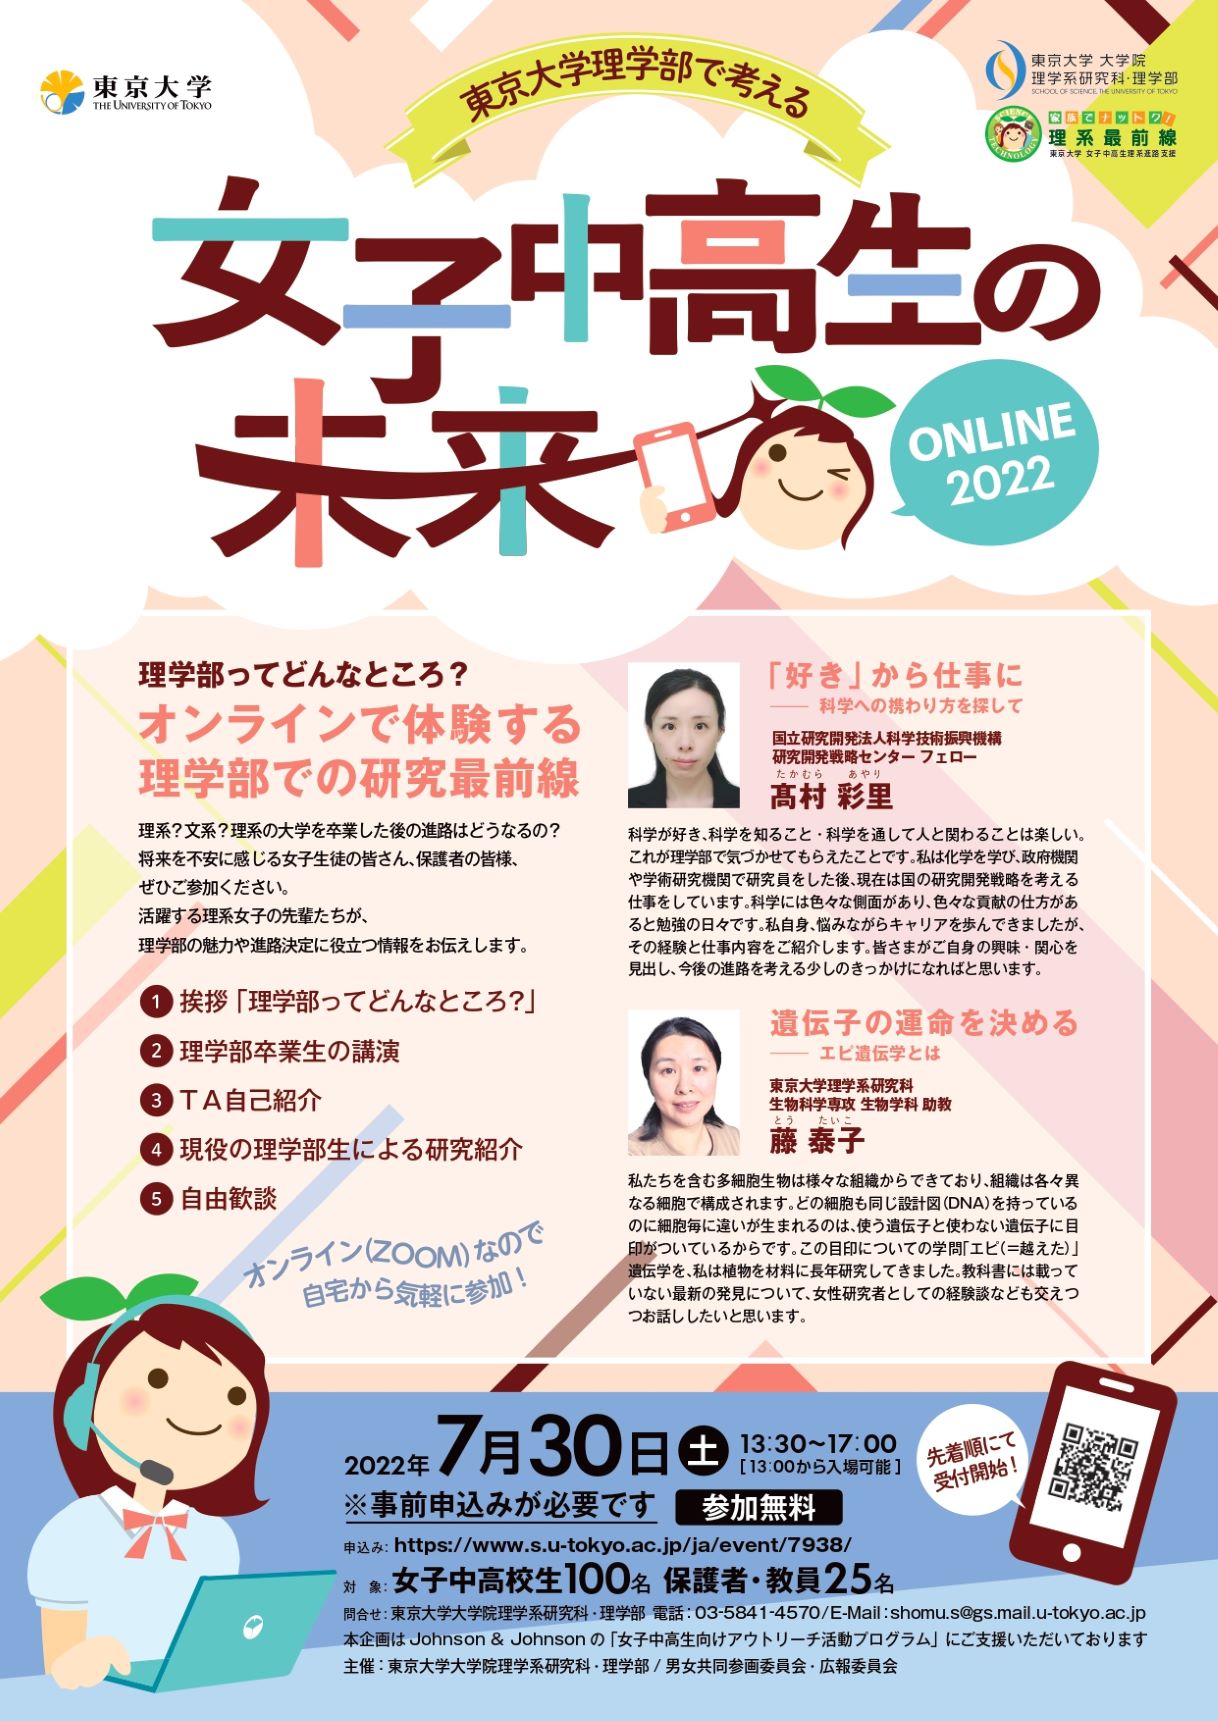 The Future of Female Junior High and High School Students at the Faculty of Science, University of Tokyo 2022 Online